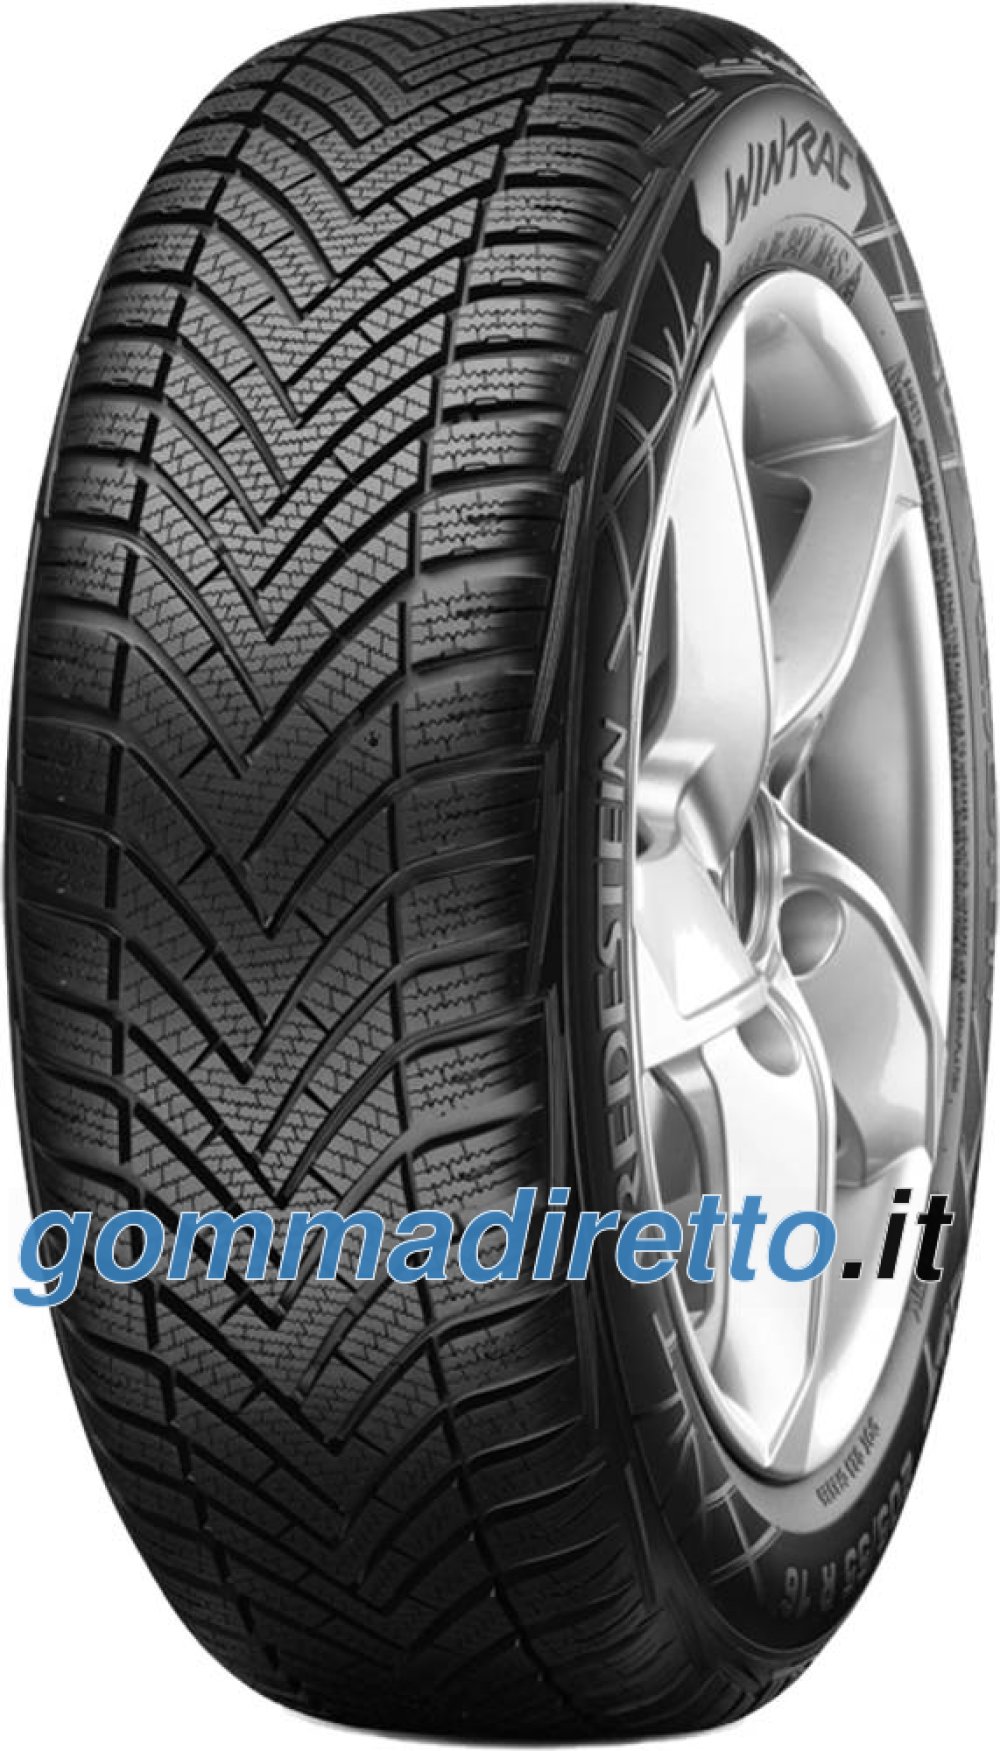 Image of Vredestein Wintrac ( 165/65 R15 81T )